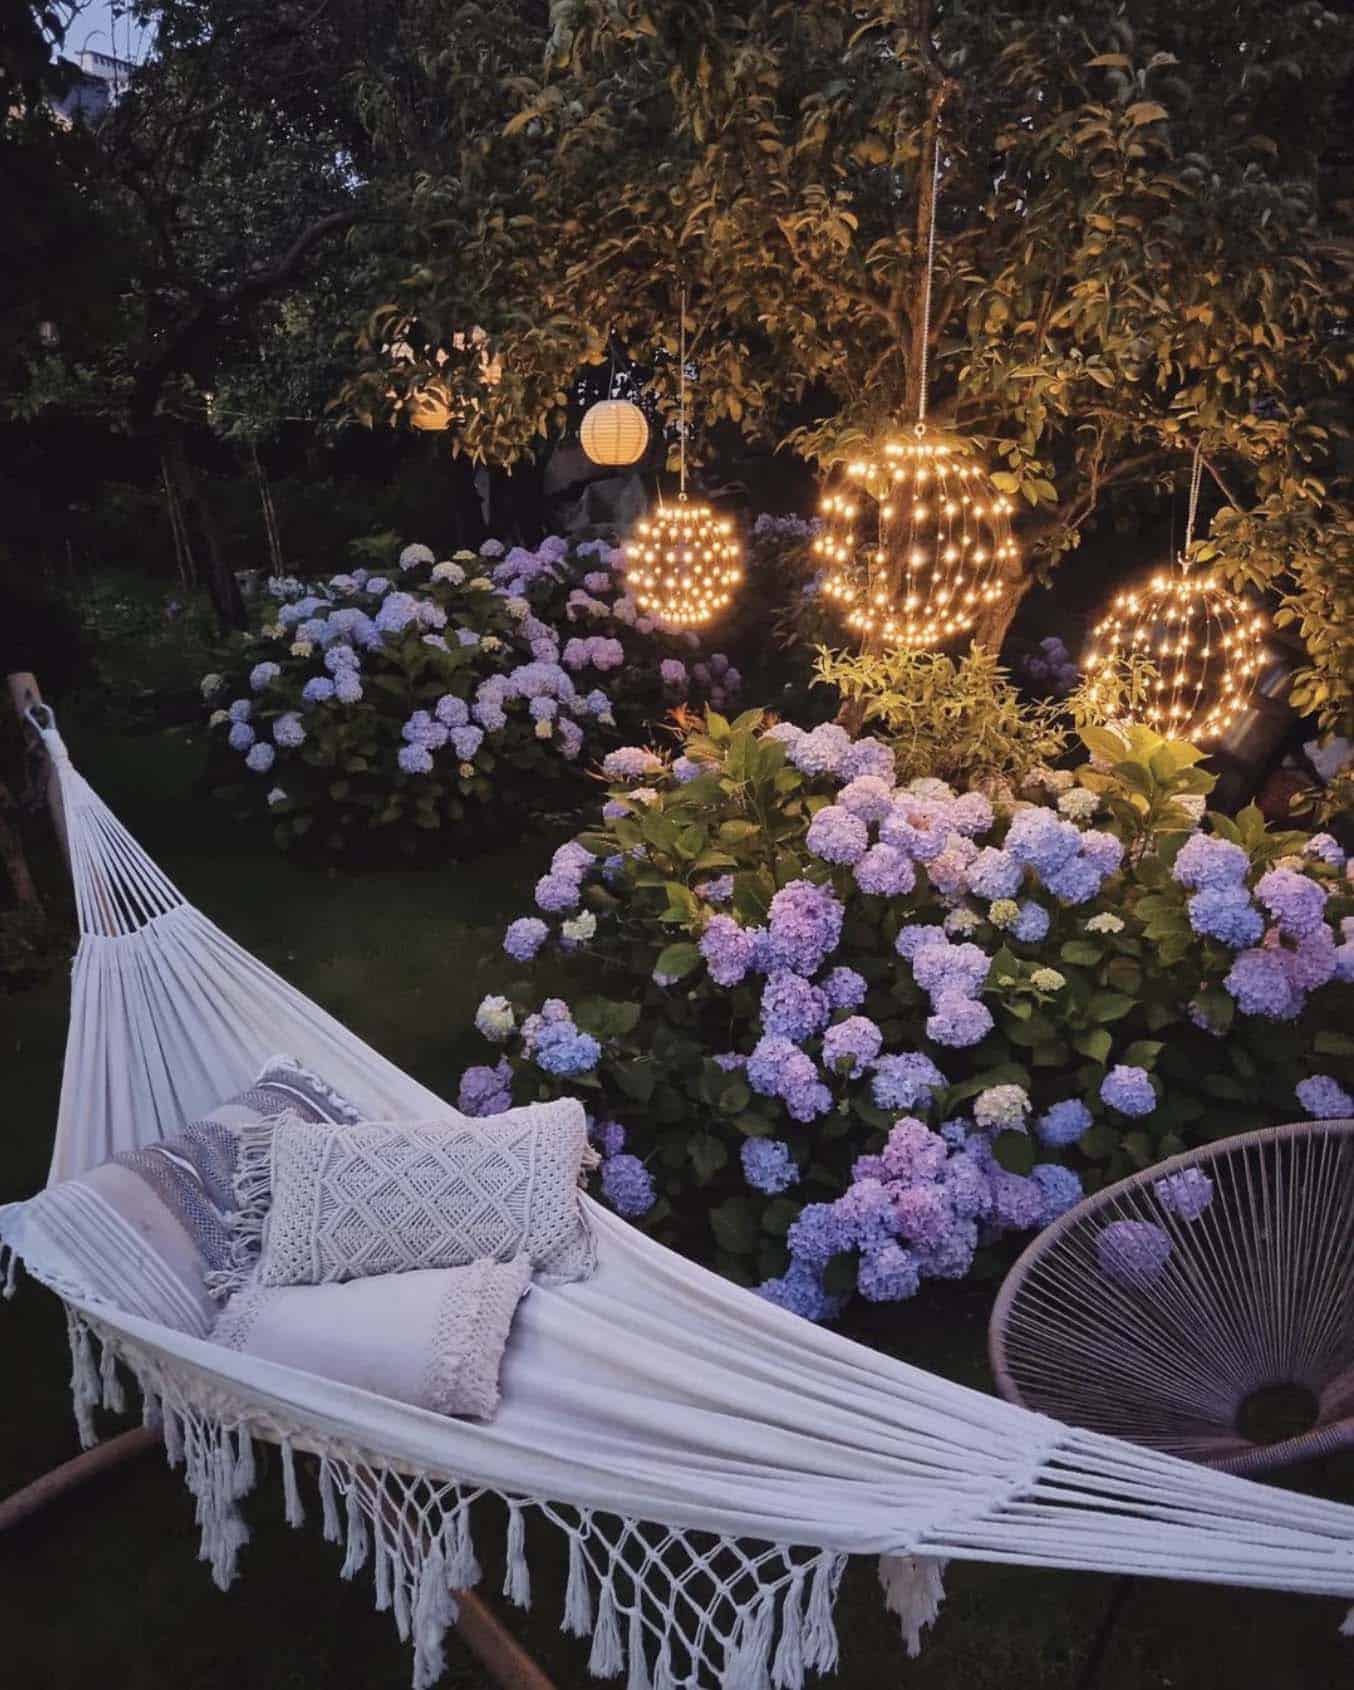 hammock in a garden with hydrangeas and hanging lights for a magical glow